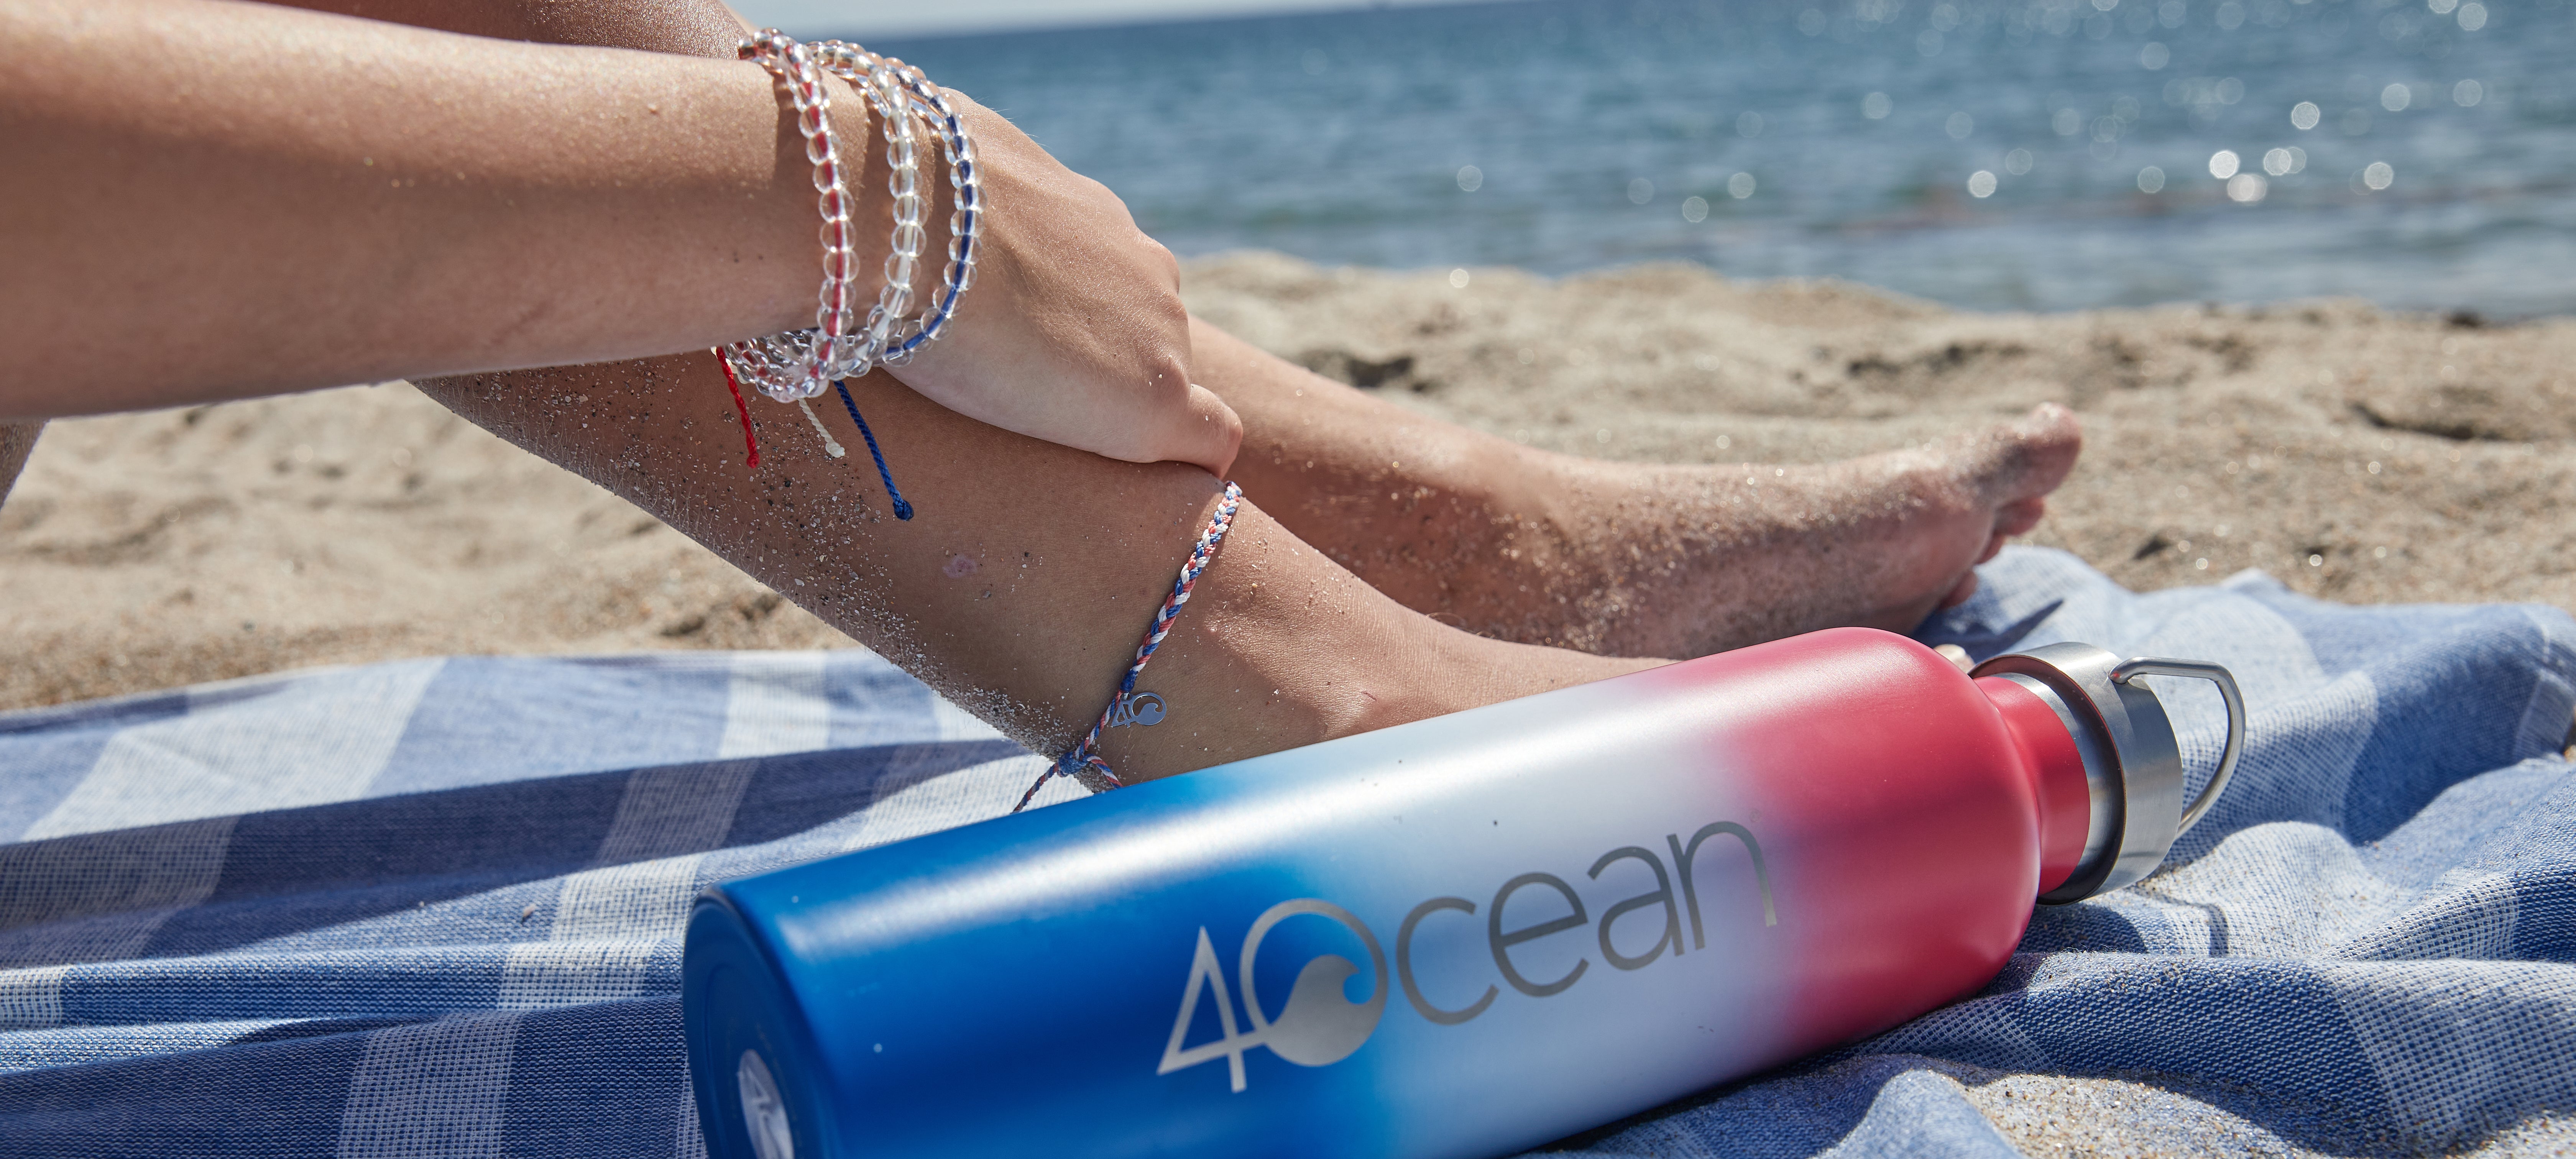 4ocean x FinalStraw Collapsible Travel Straw 2.0